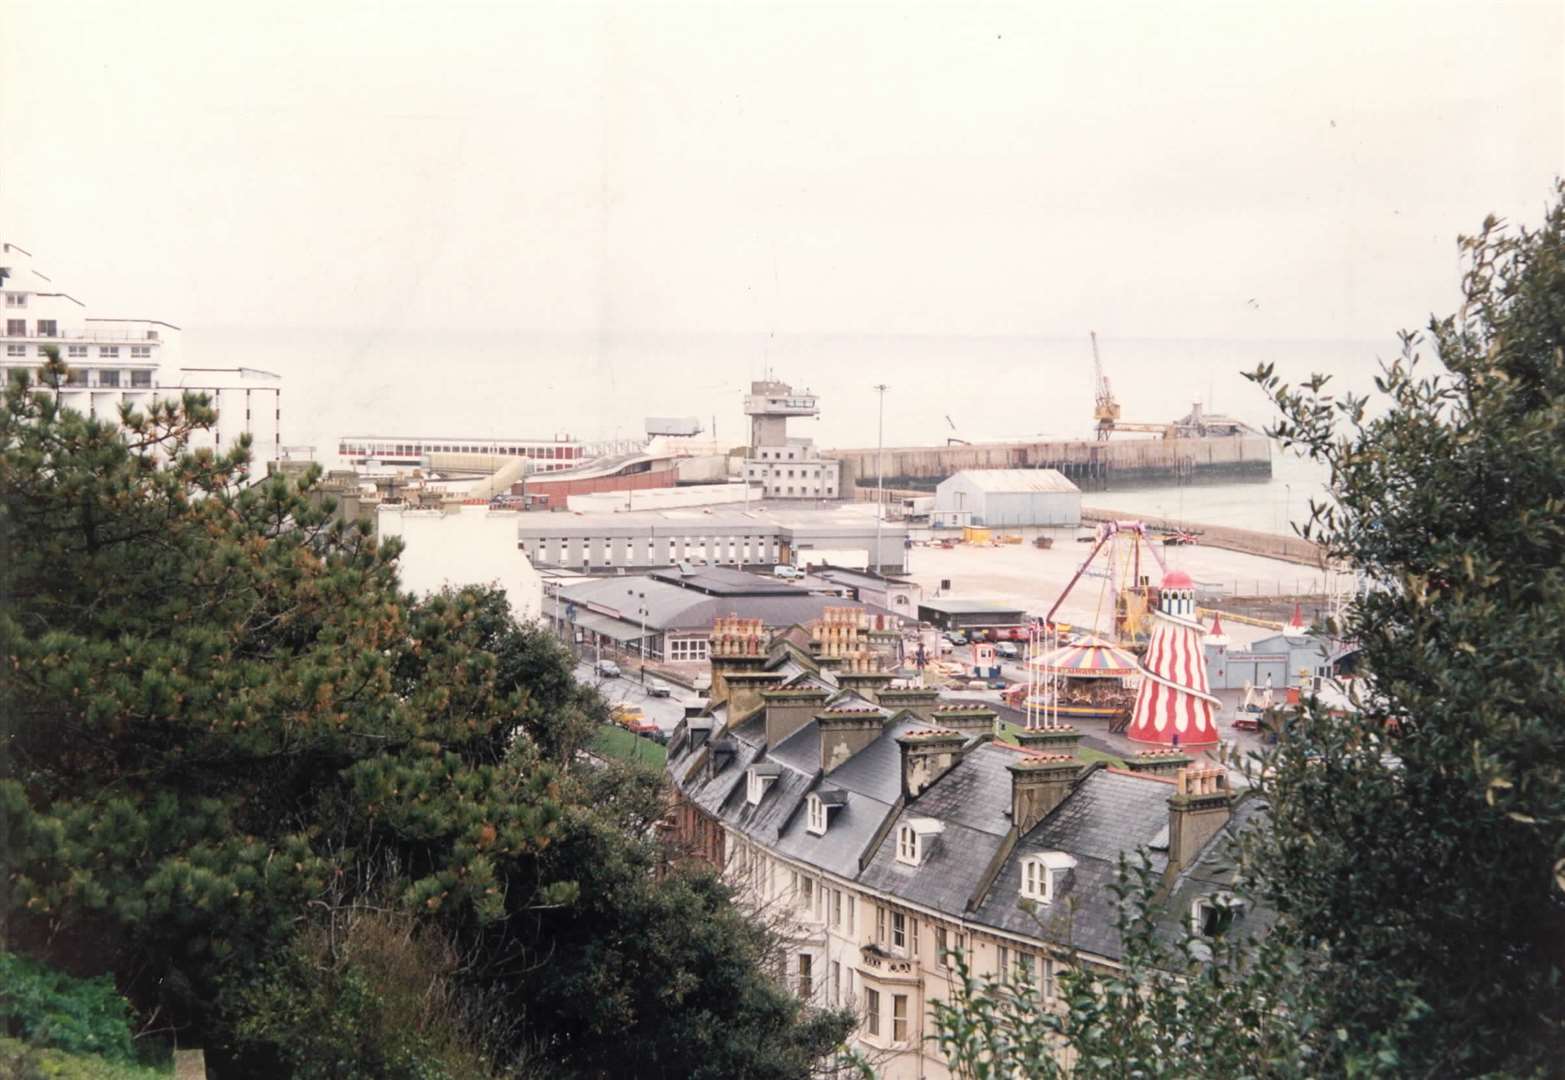 Overlooking Folkestone harbour and the Rotunda funfair on April 3, 1992. The Rotunda closed in 2003 - and now 1,000 homes are being built along the seafront by Folkestone Harbour and Seafront Development Company, run by former Saga Group chair Sir Roger De Haan